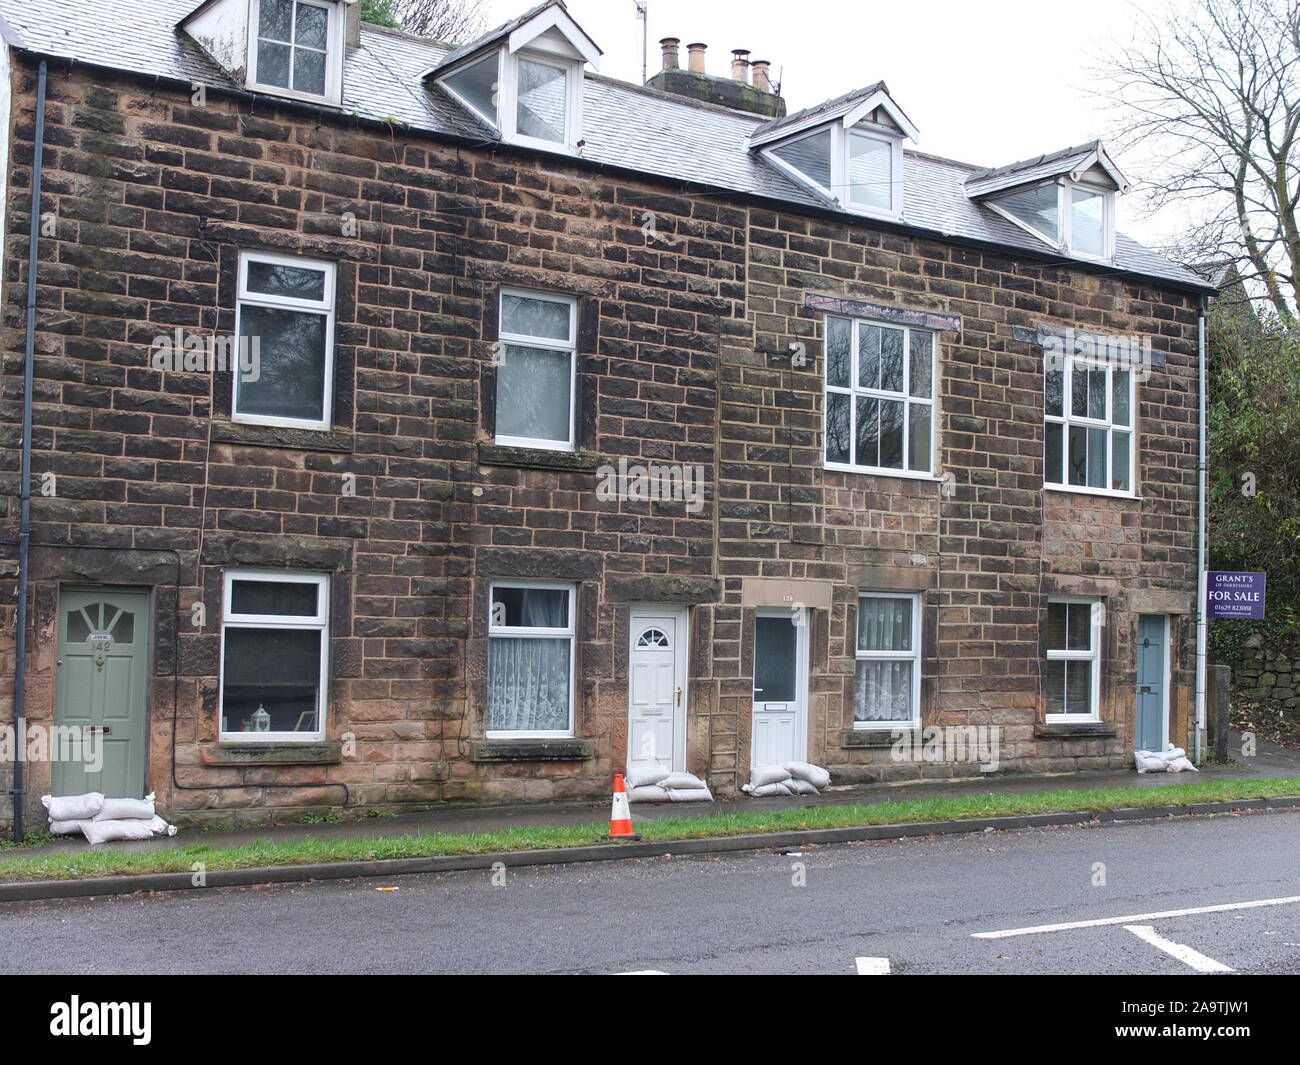 Terraced houses including one for sale at Matlock Derbyshire with sandbags piled up outside front doors the week after heavy flooding in November 2019 Stock Photo